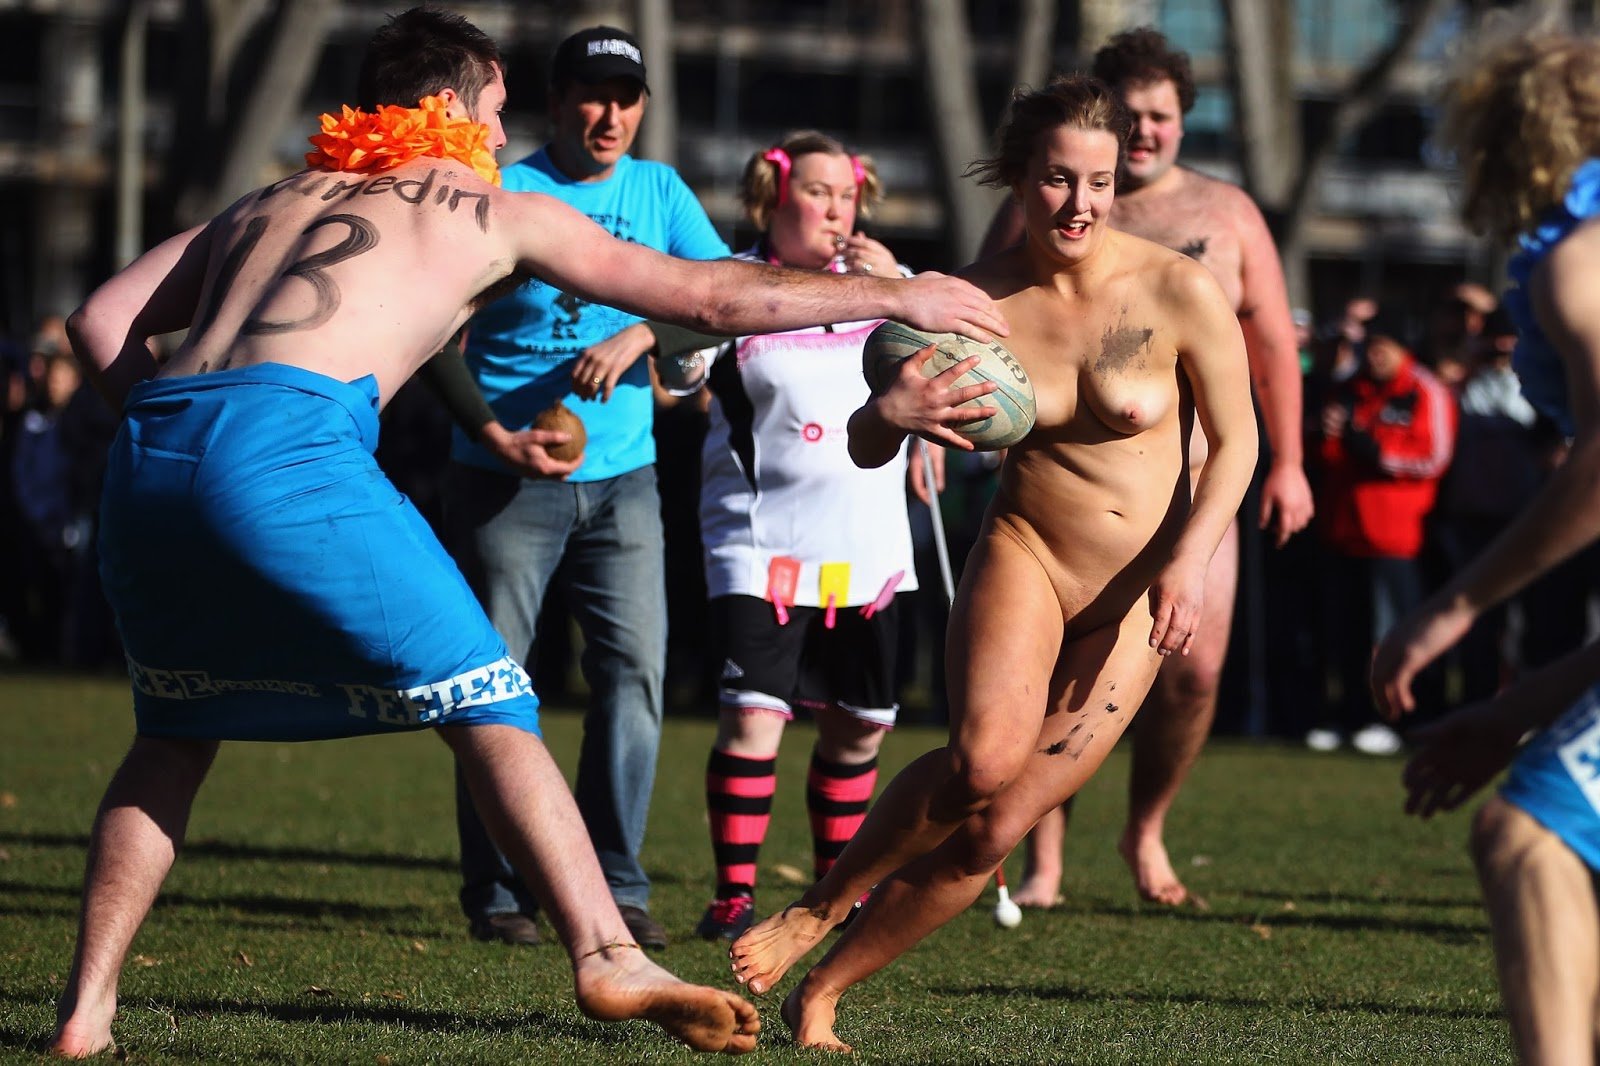 Nude rugby